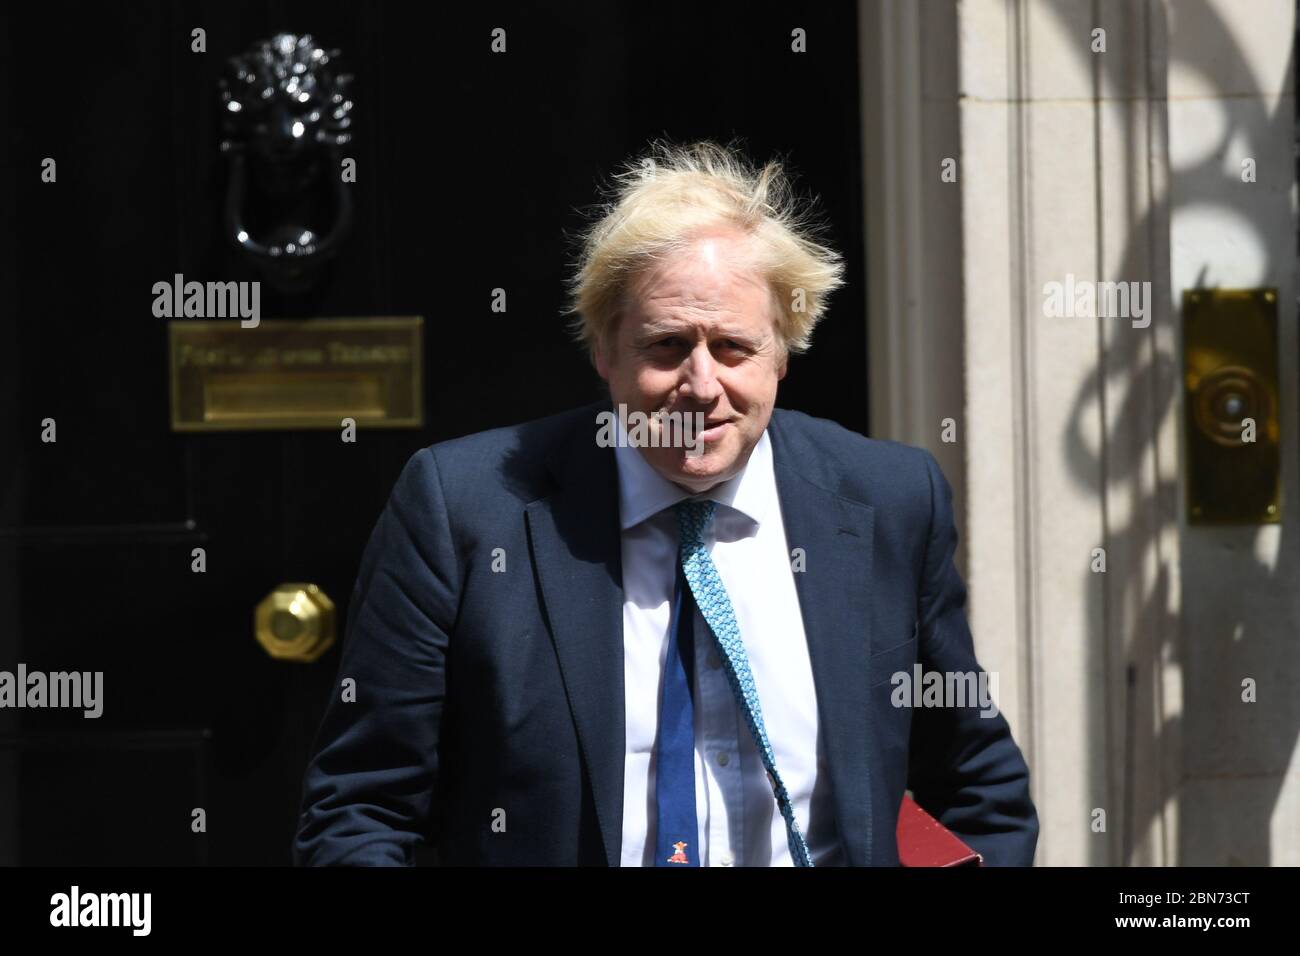 Prime Minister Boris Johnson leaves 10 Downing Street, London, for PMQs in the House of Commons, on the first day of the easing of coronavirus restrictions to bring the country out of lockdown. Stock Photo